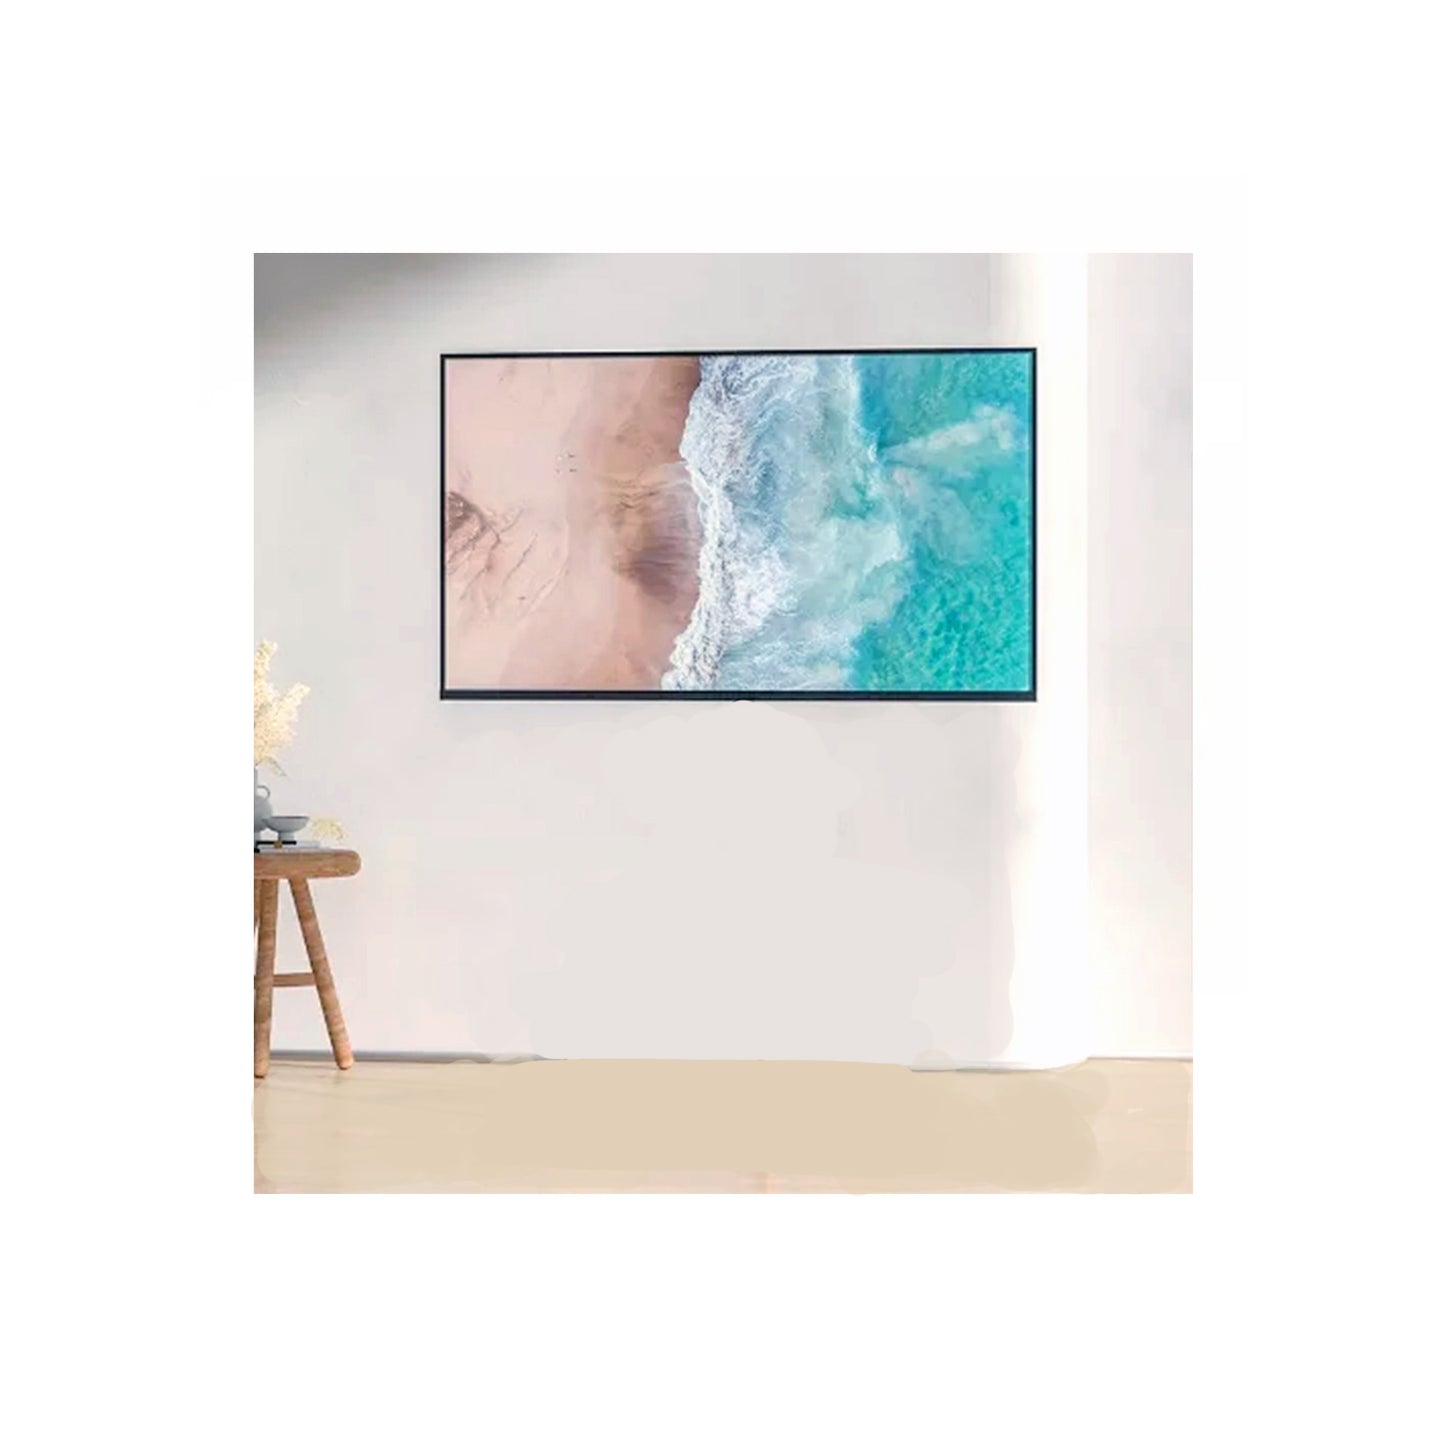 135" Indoor HD Full Colour COB All-in-one LED Dispaly